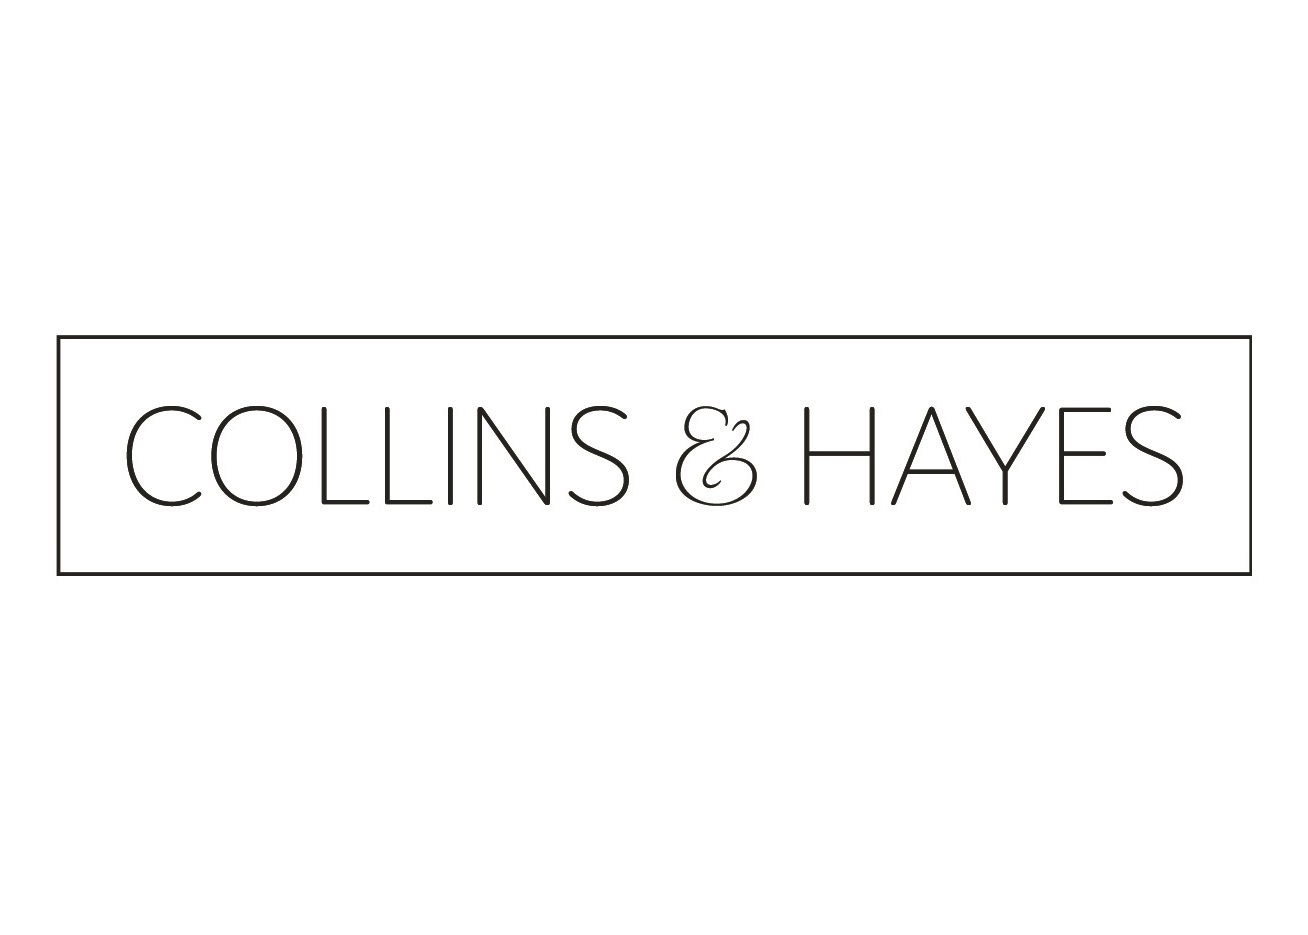 Collins & Hayes